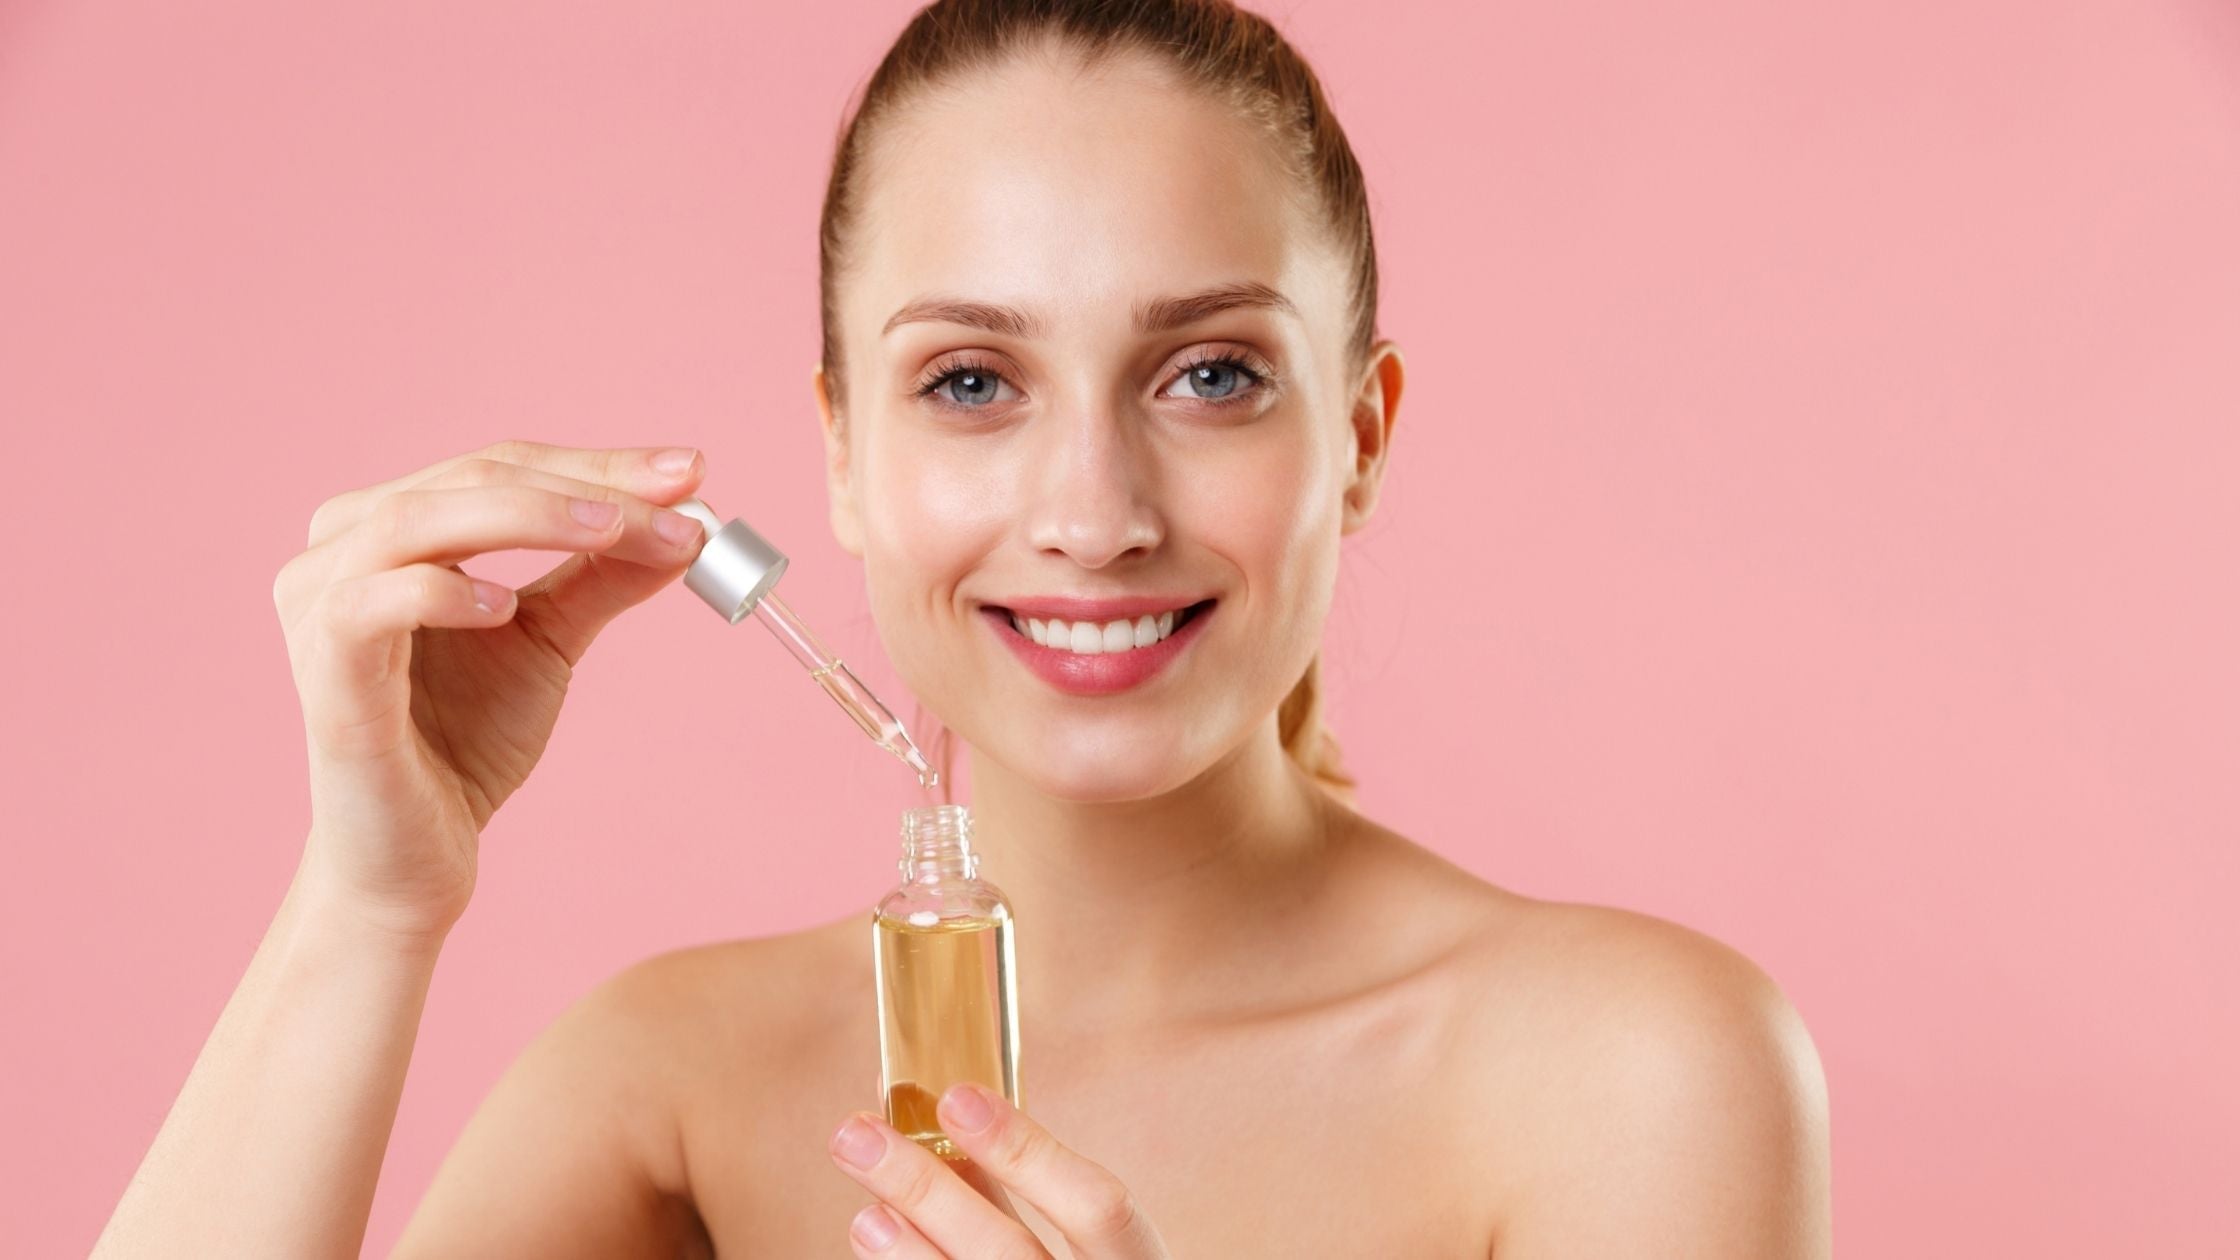 What are the benefits of proper skin care?